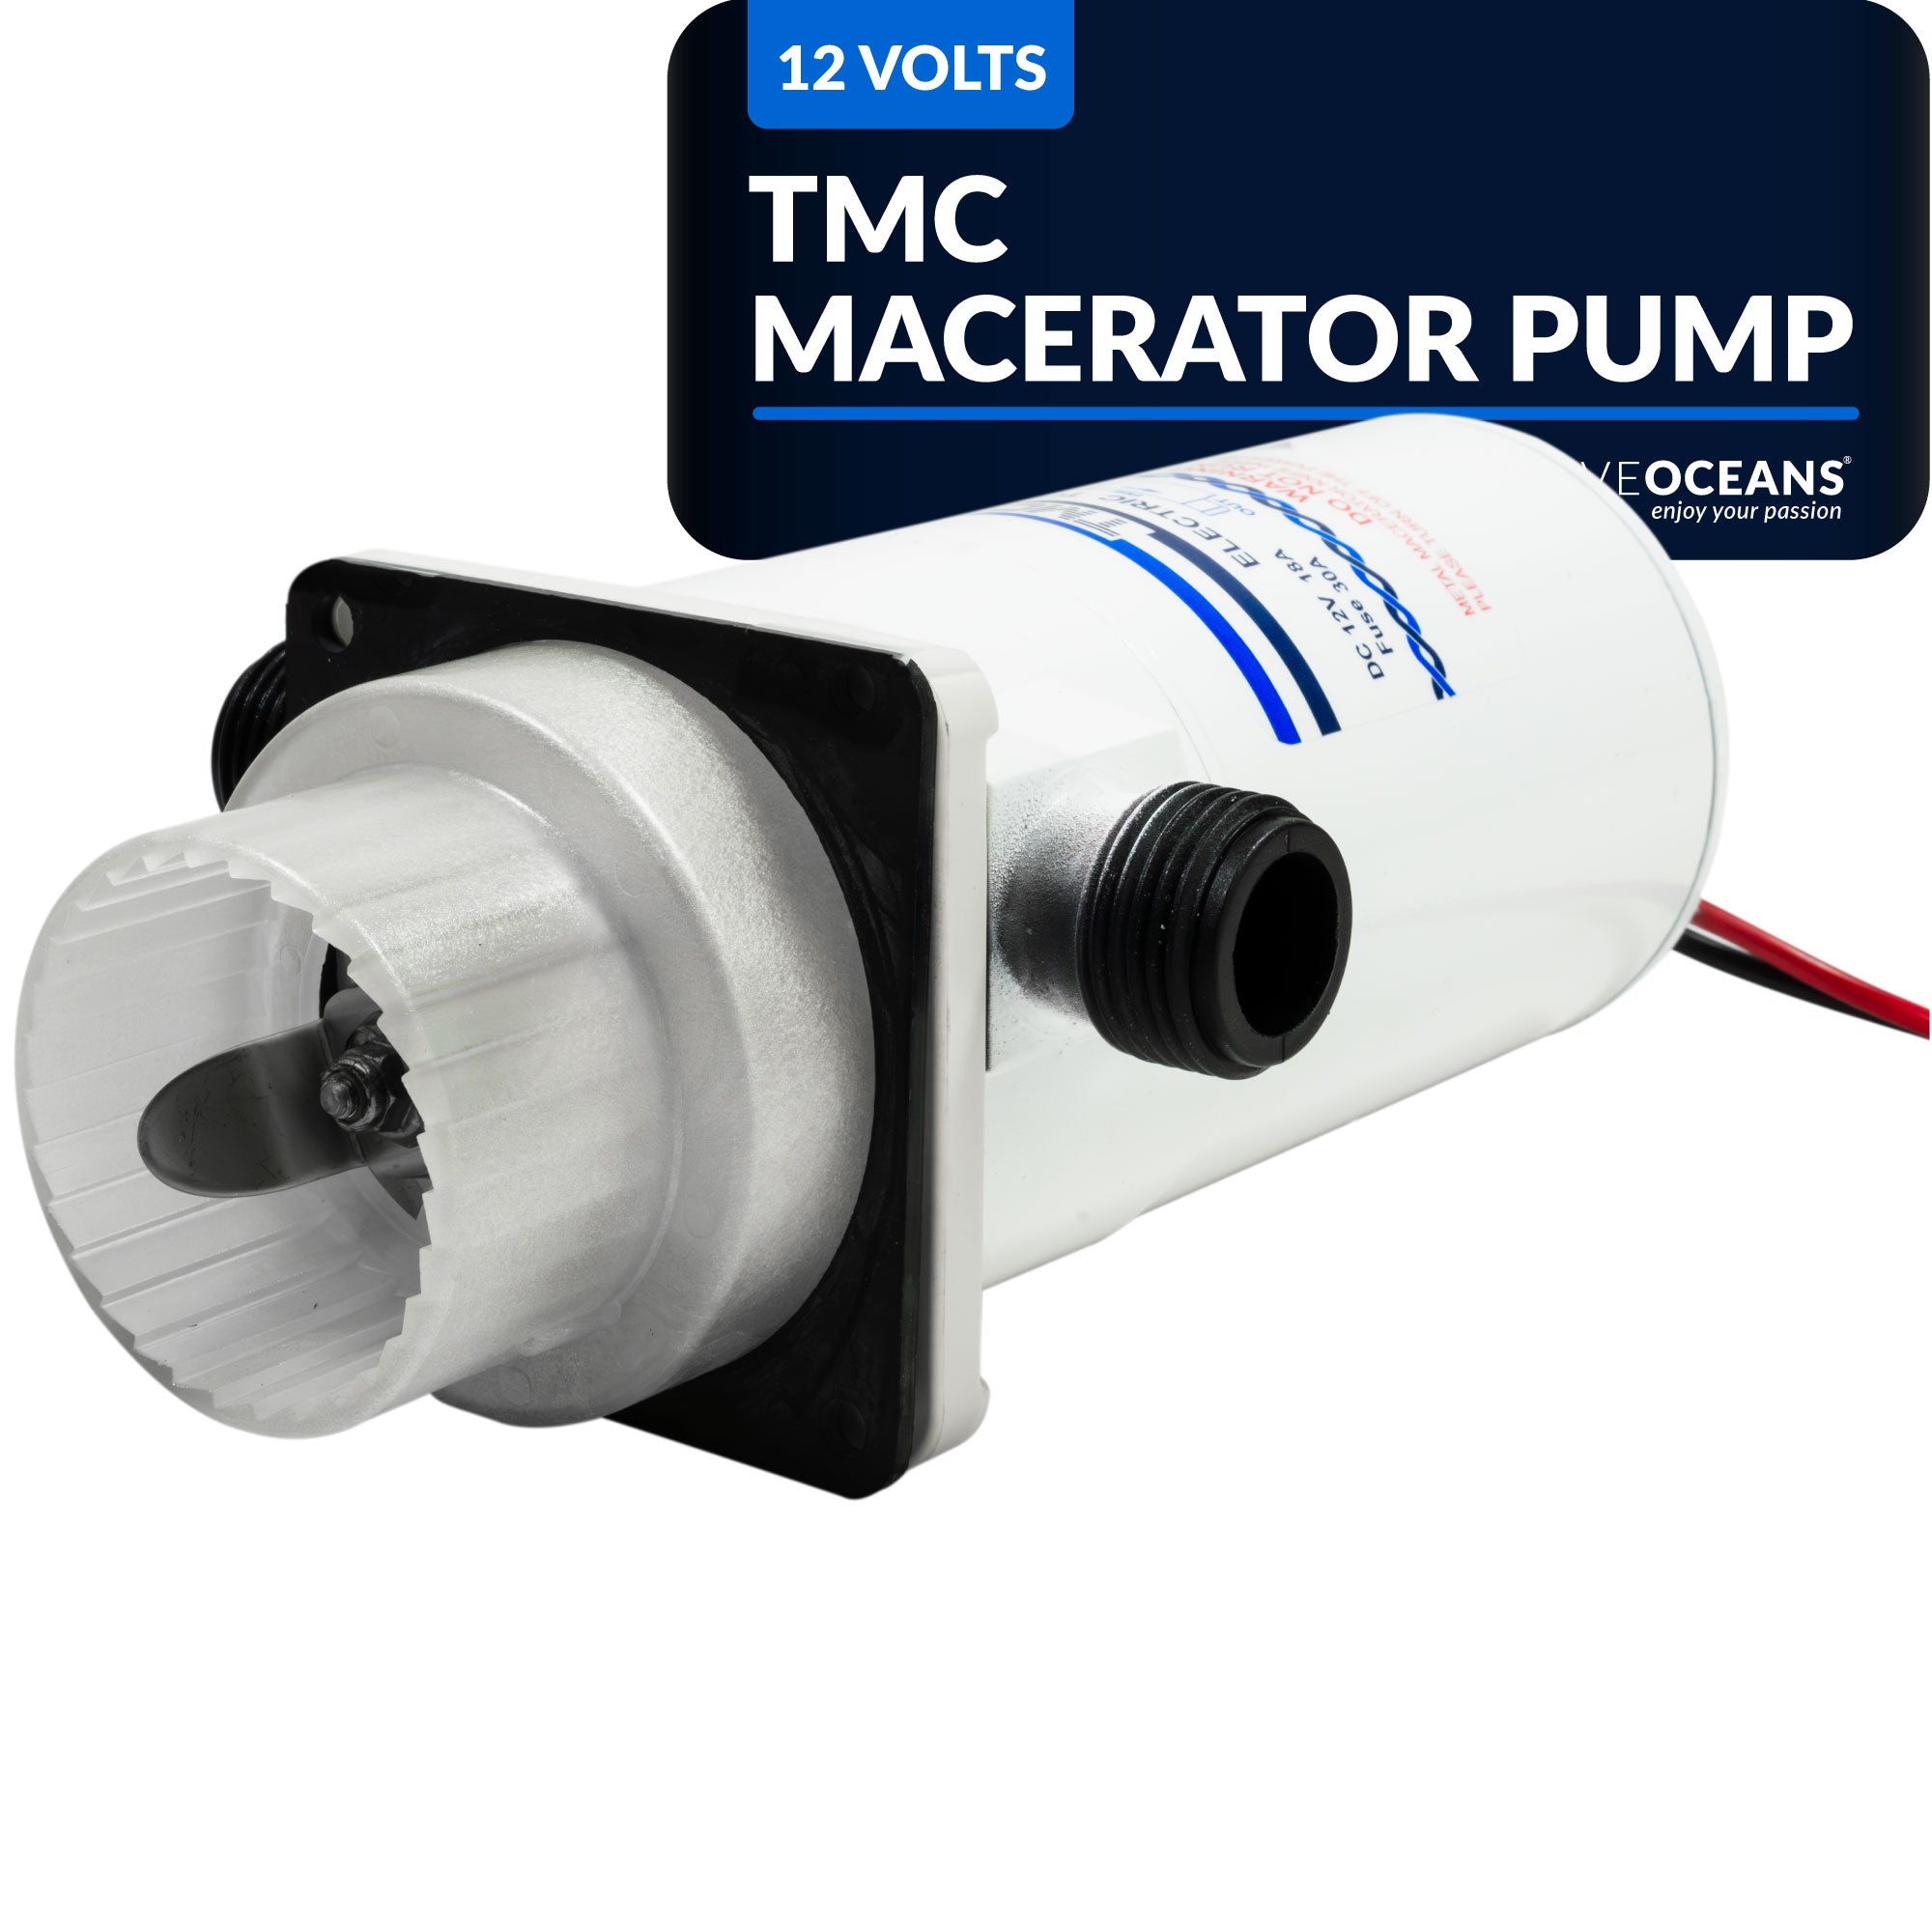 TMC Electric Toilet Macerator Waste Pump with Threaded-On Hose Connection 12V - FO4701